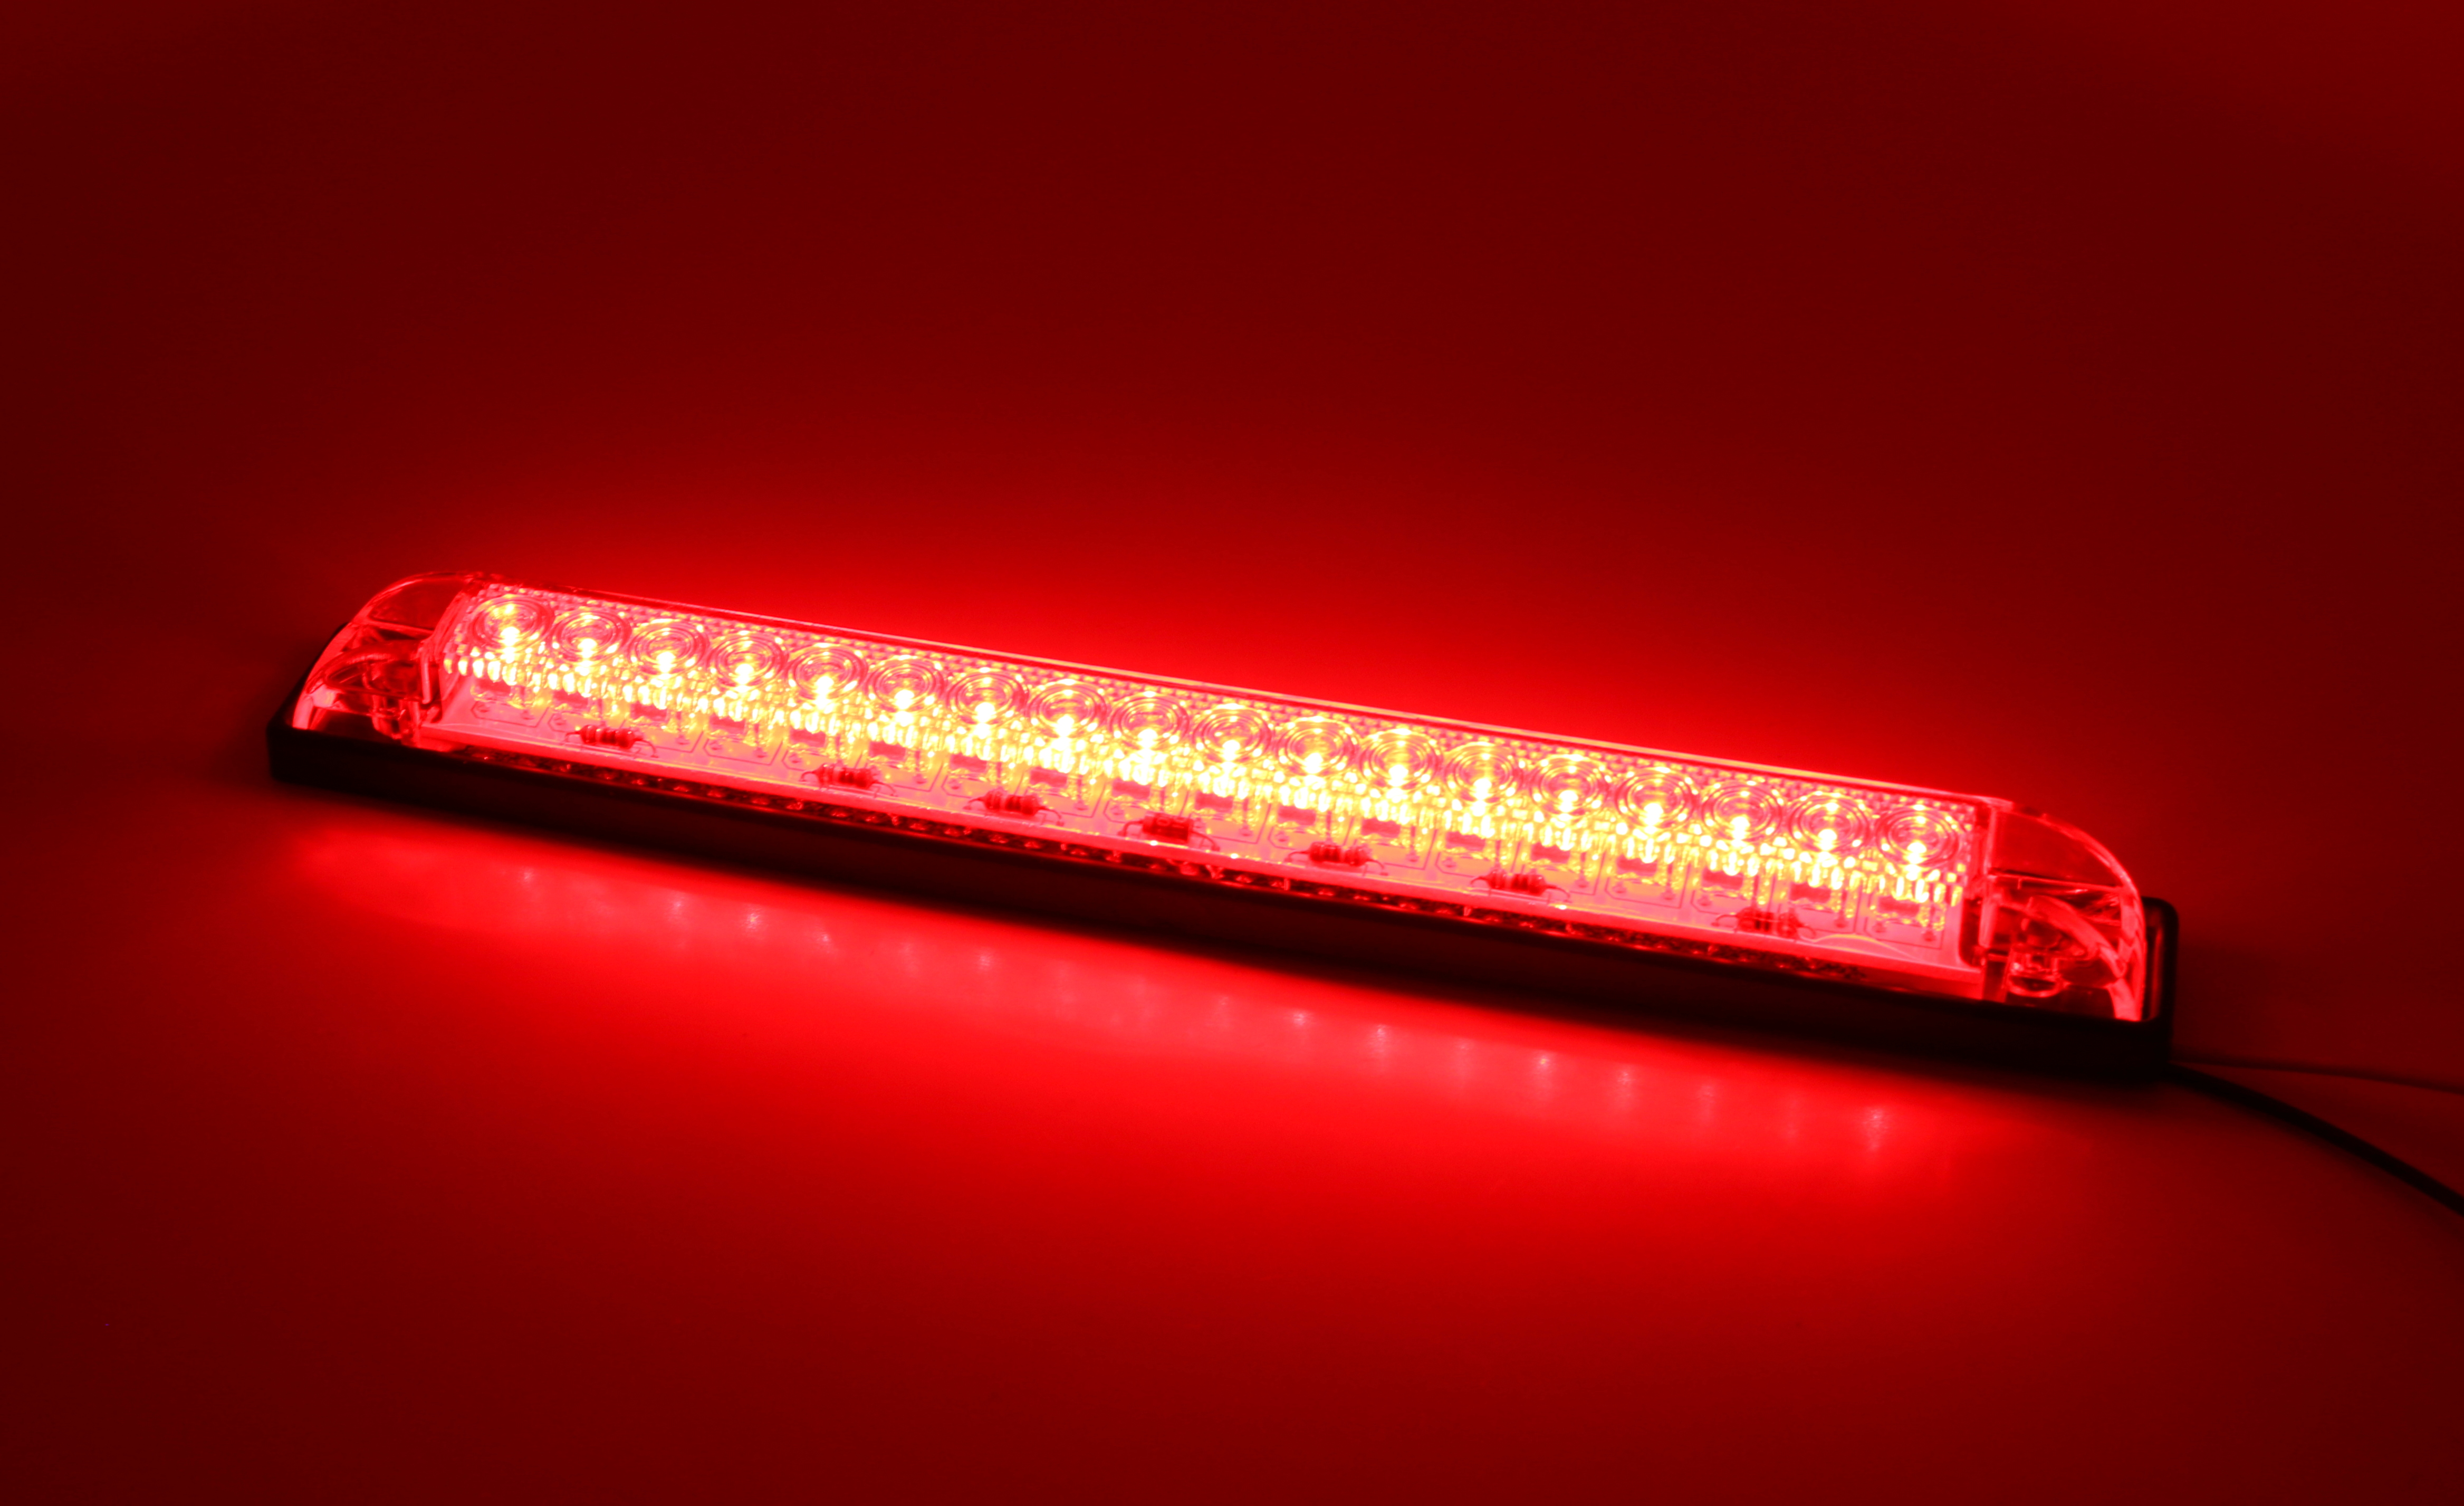 Details about   4 Large Super Bright 12 volt Red LED Waterproof RV Courtesy Light Strips 